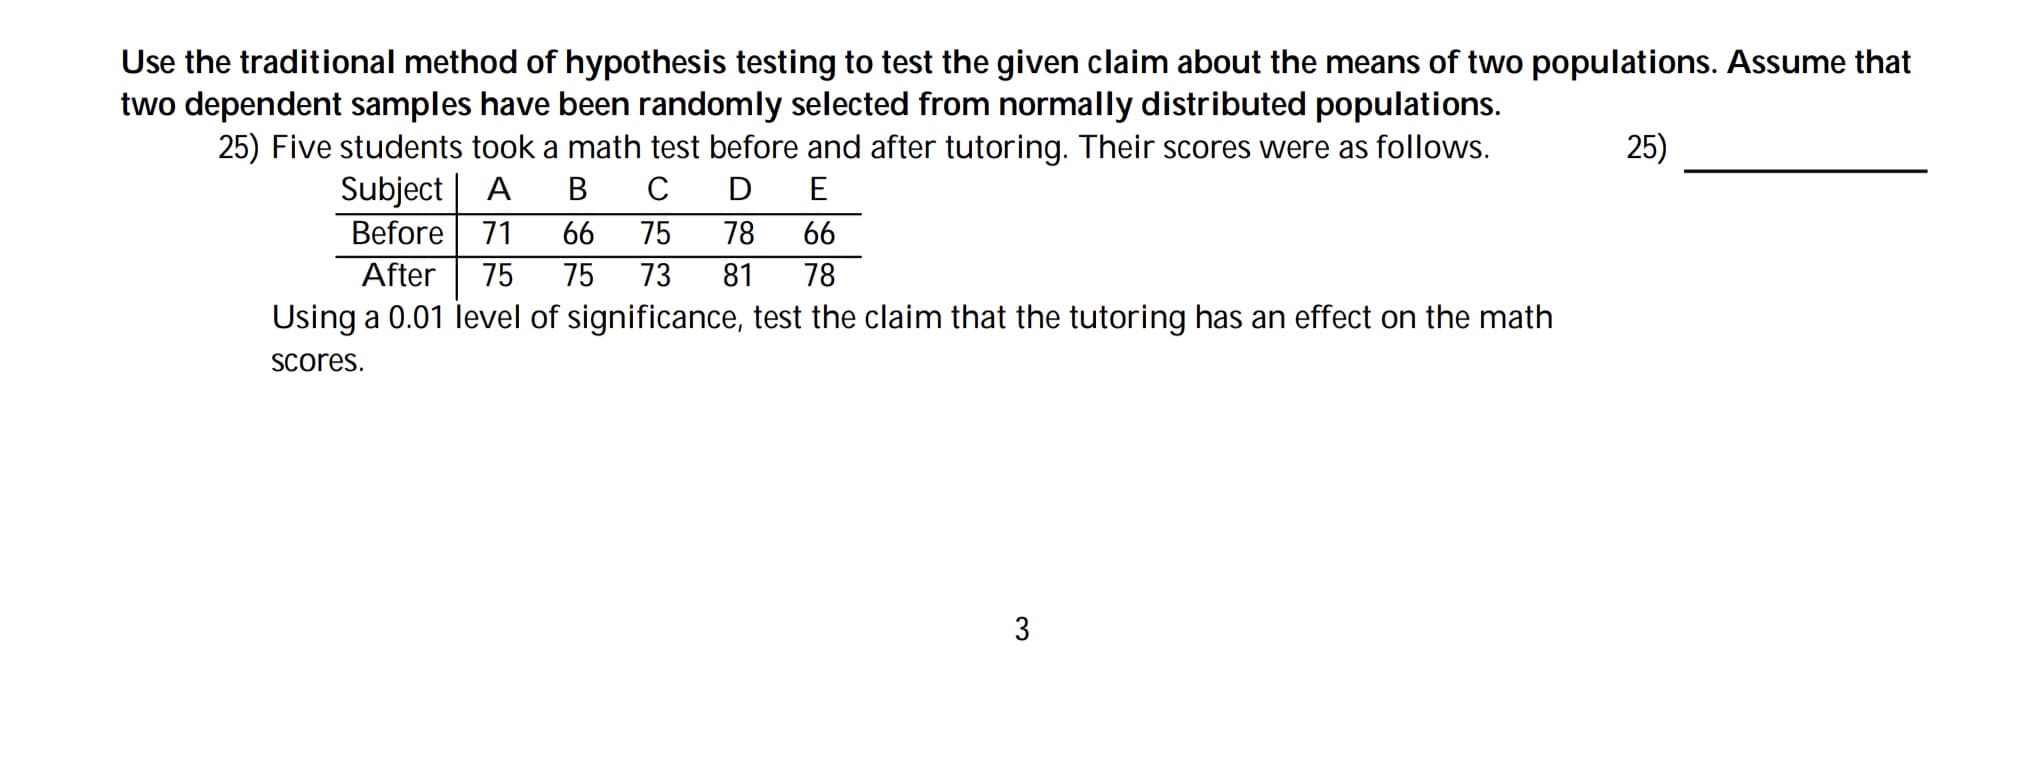 Use the traditional method of hypothesis testing to test the given claim about the means of two populations. Assume that
two dependent samples have been randomly selected from normally distributed populations.
25) Five students took a math test before and after tutoring. Their scores were as follows.
25)
Subject| A
Before| 71
В
C
D
E
66
75
78
66
After
75
75
73
81
78
Using a 0.01 level of significance, test the claim that the tutoring has an effect on the math
Scores.
